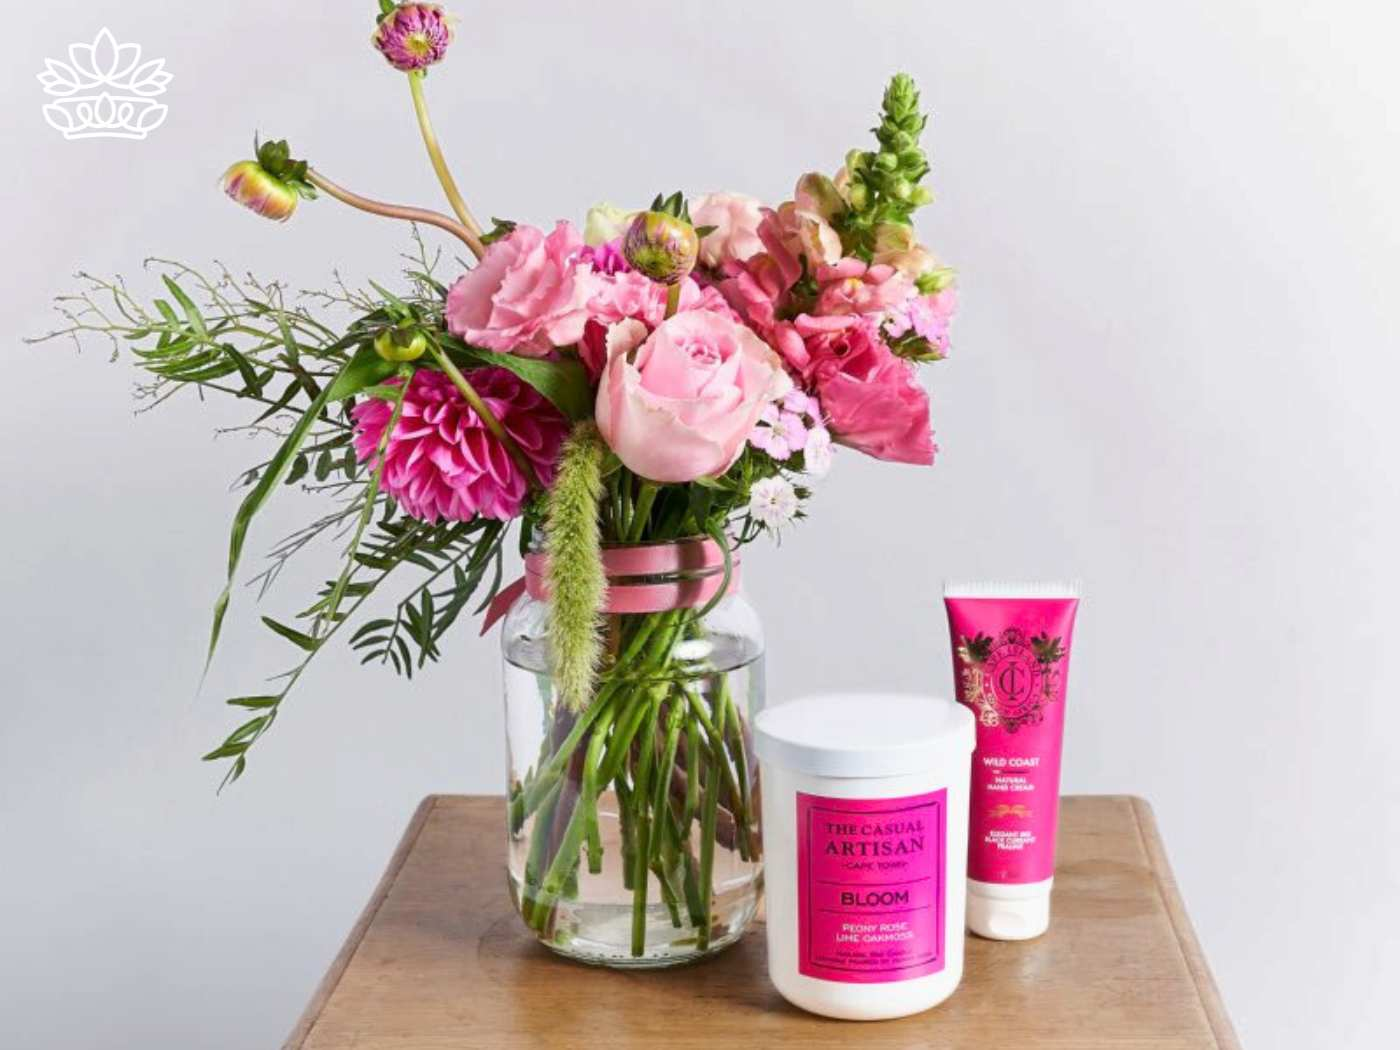 A spa-themed gift set featuring a jar of natural hand cream, a floral-scented candle labeled 'Bloom,' and a bouquet of pink flowers in a mason jar, representing a thoughtful gesture of care and relaxation. Fabulous Flowers and Gifts. Gifts for Her.